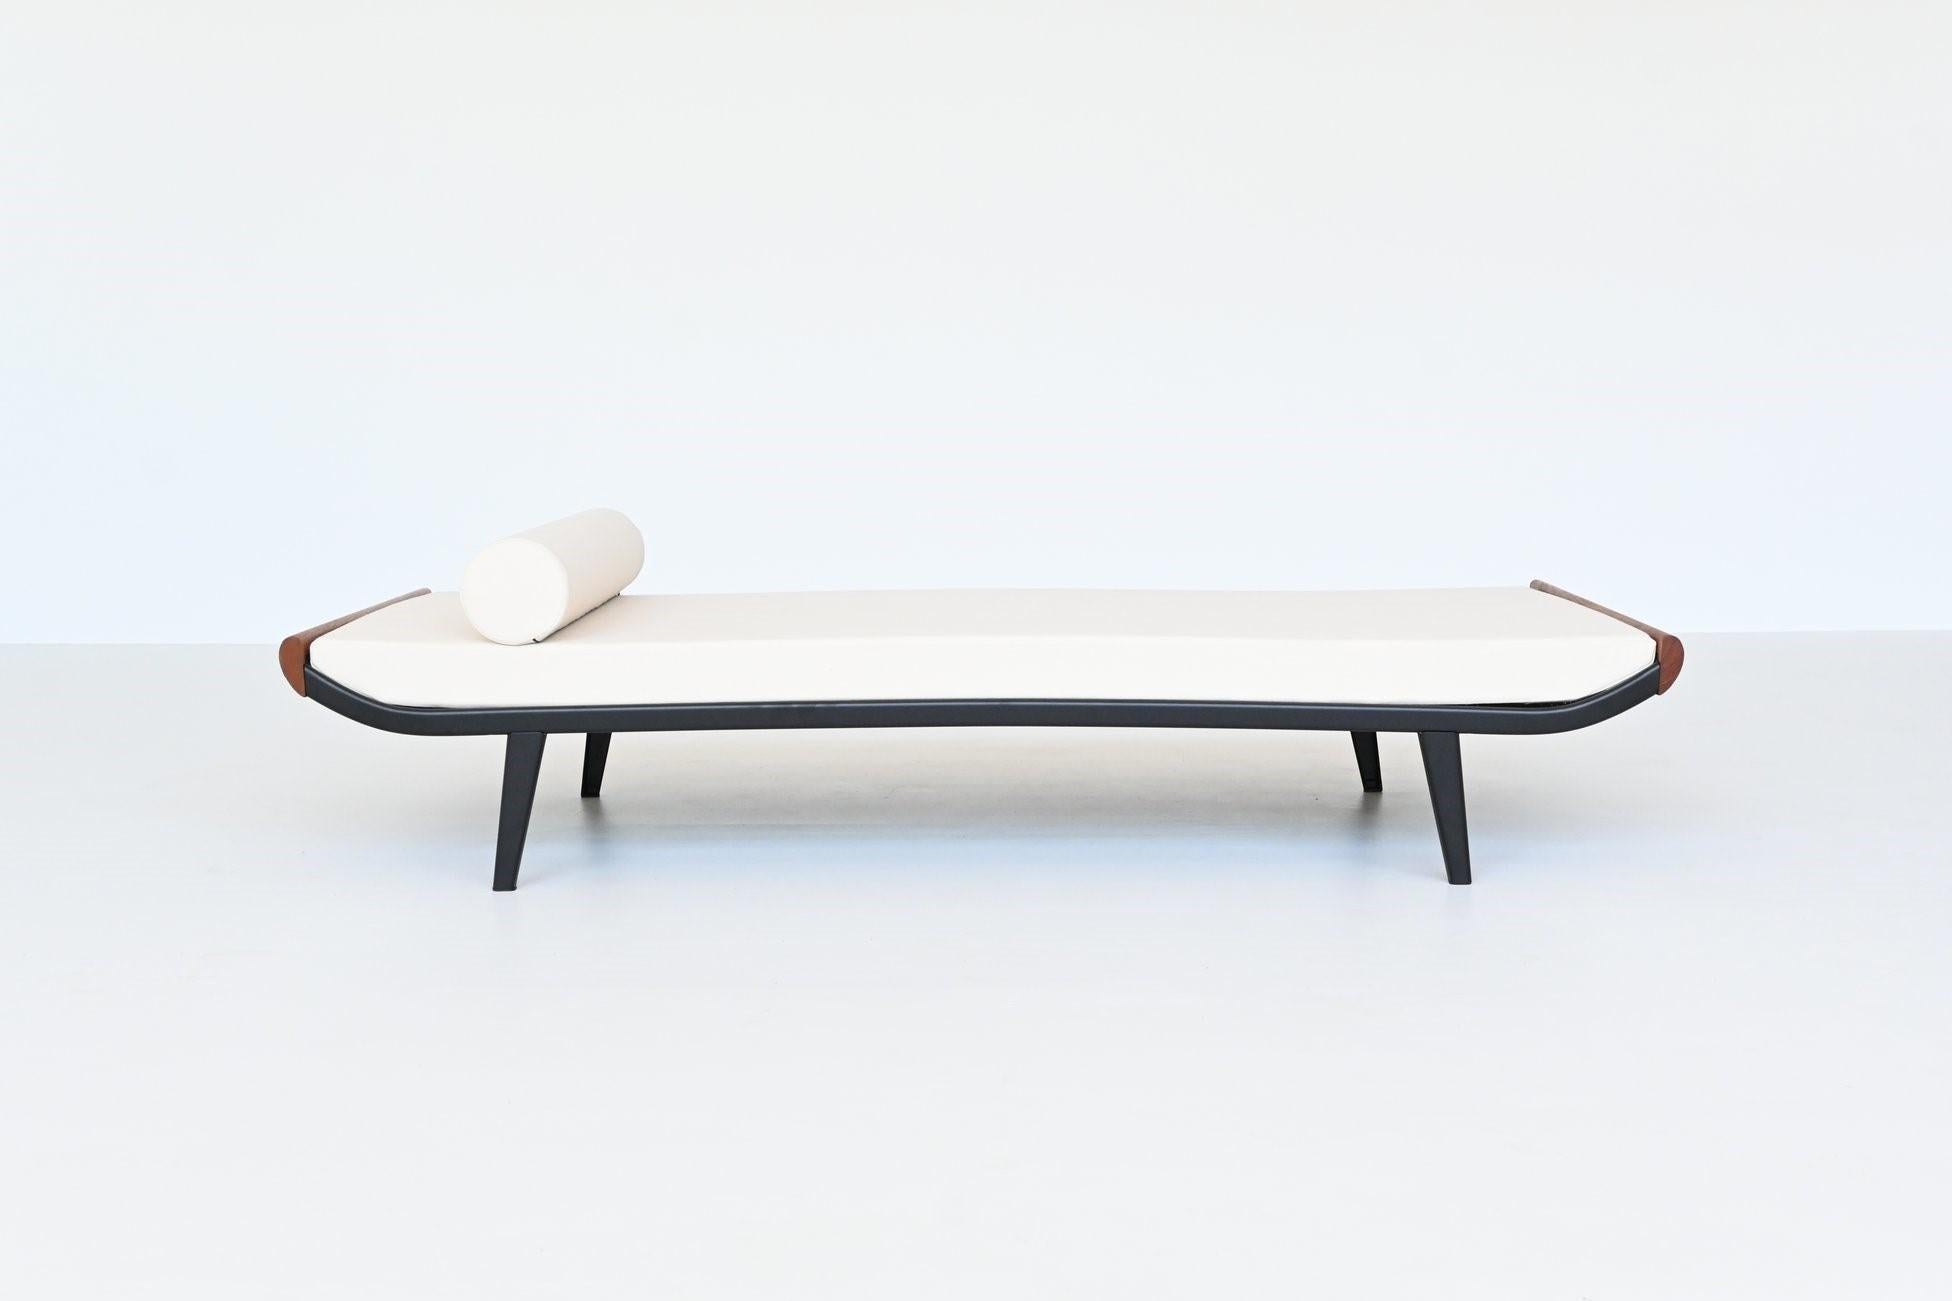 Beautiful and iconic Cleopatra daybed designed by Dick Cordemeijer for Auping, The Netherlands 1954. The frame is made of black coated metal and the ends are in solid teak wood. The mattress is upholstered with high quality off-white linen fabric,